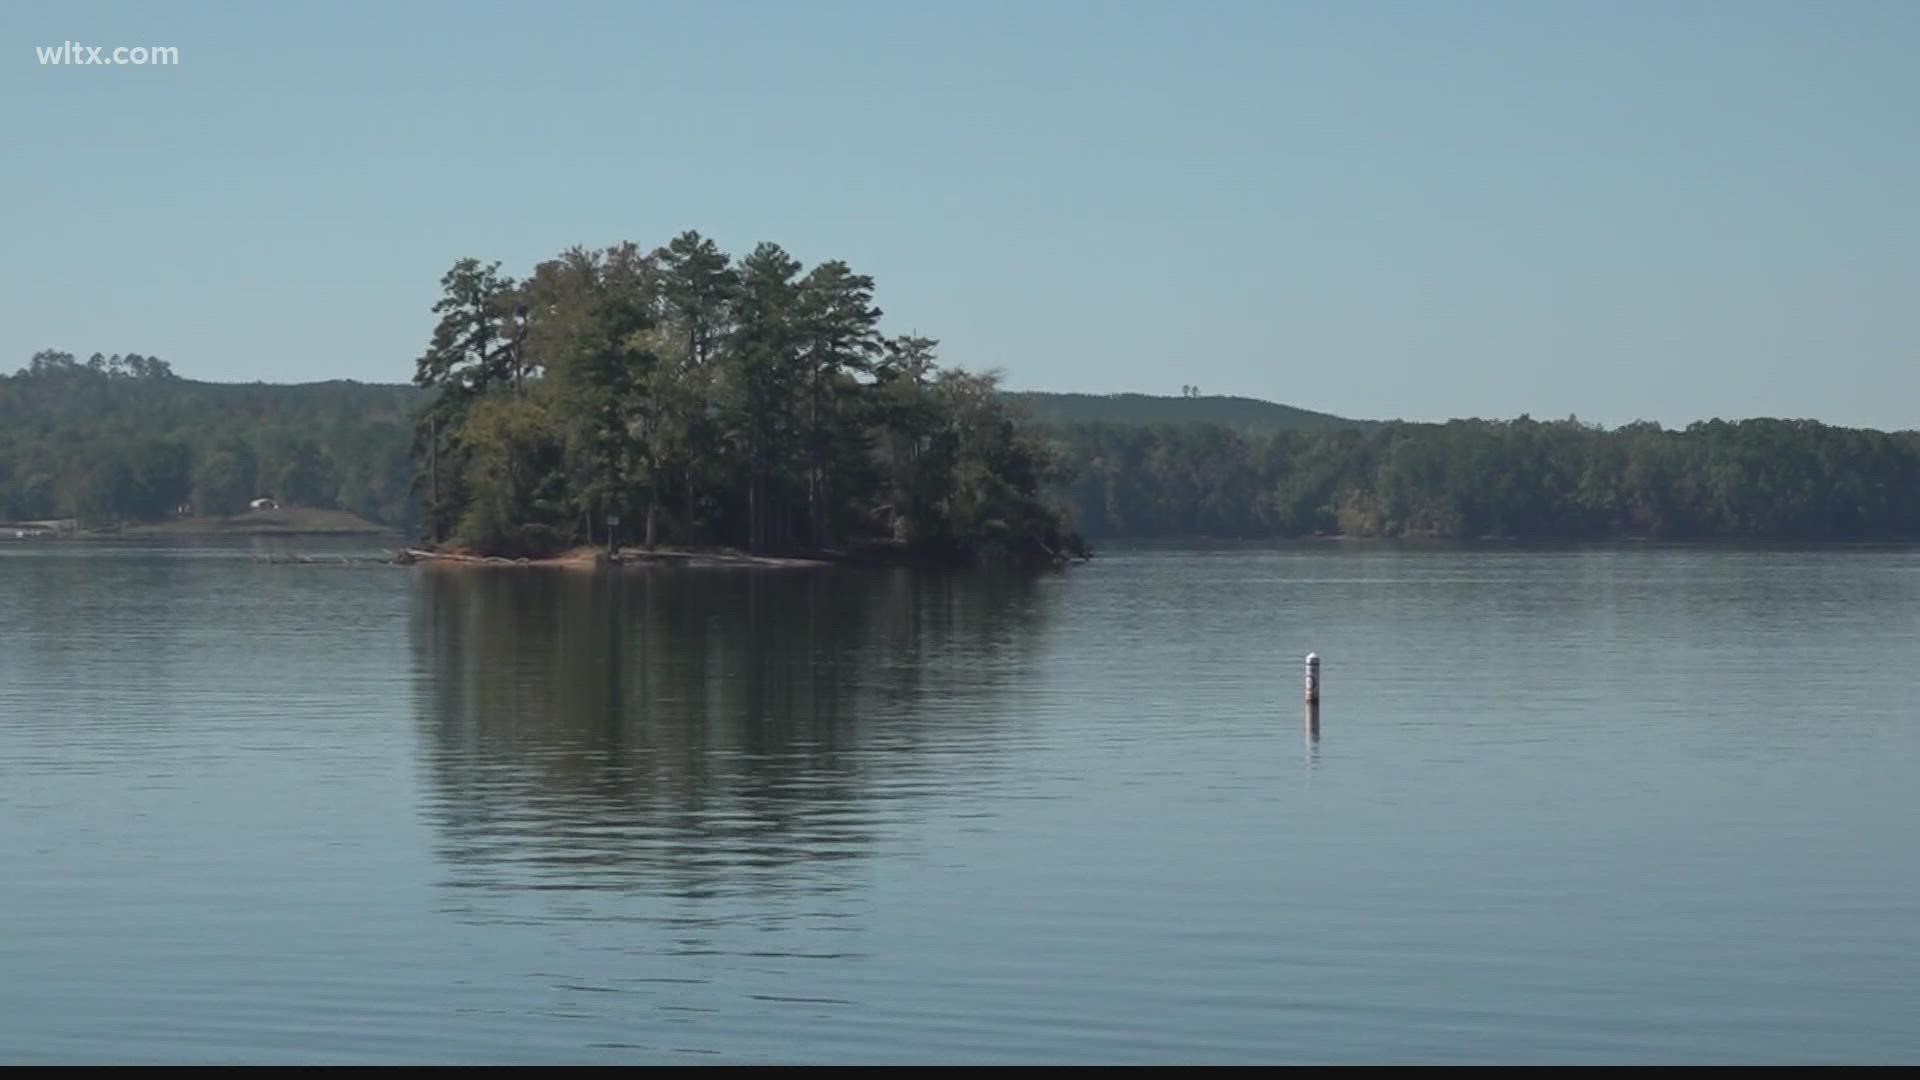 A quiet Lake Wateree will soon be quieter as temperatures drop along with lake levels. Here's why and when.